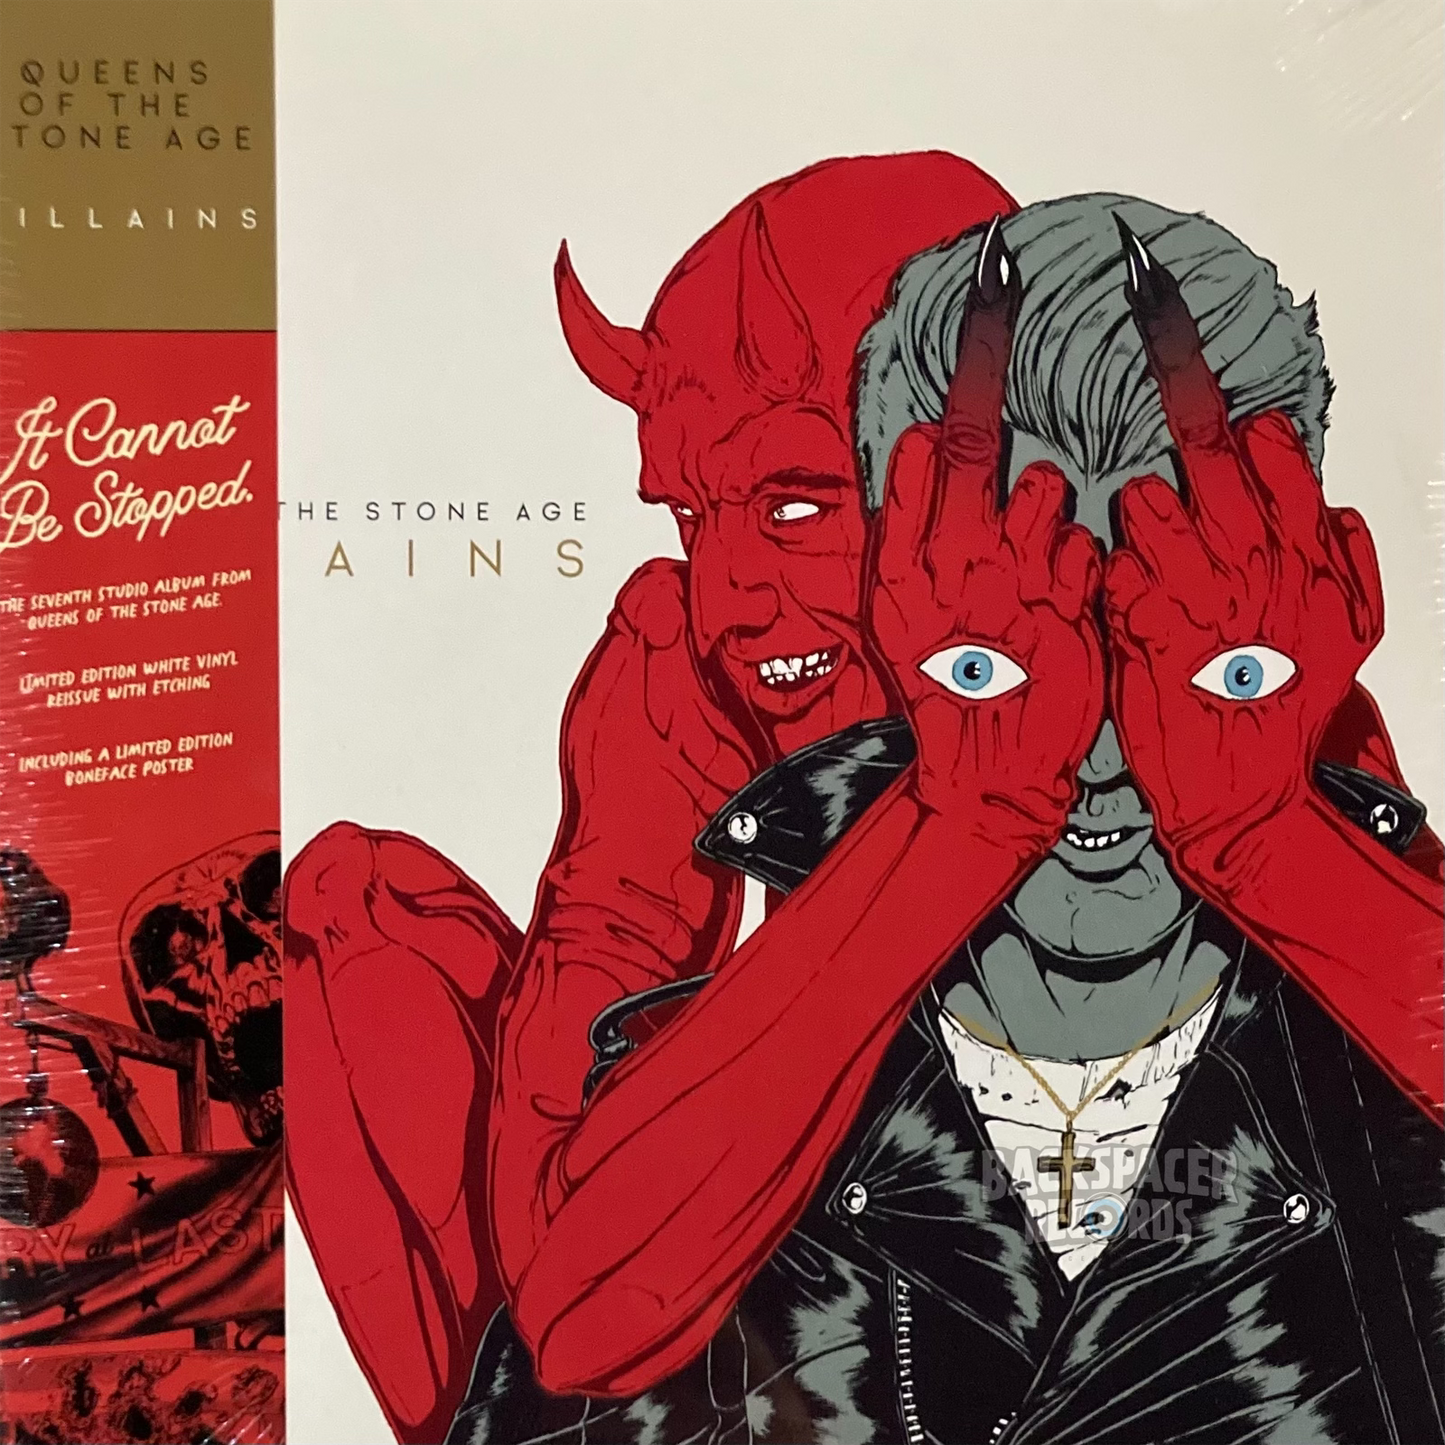 Queens Of The Stone Age – Villains (Limited Edition) 2-LP (Sealed)